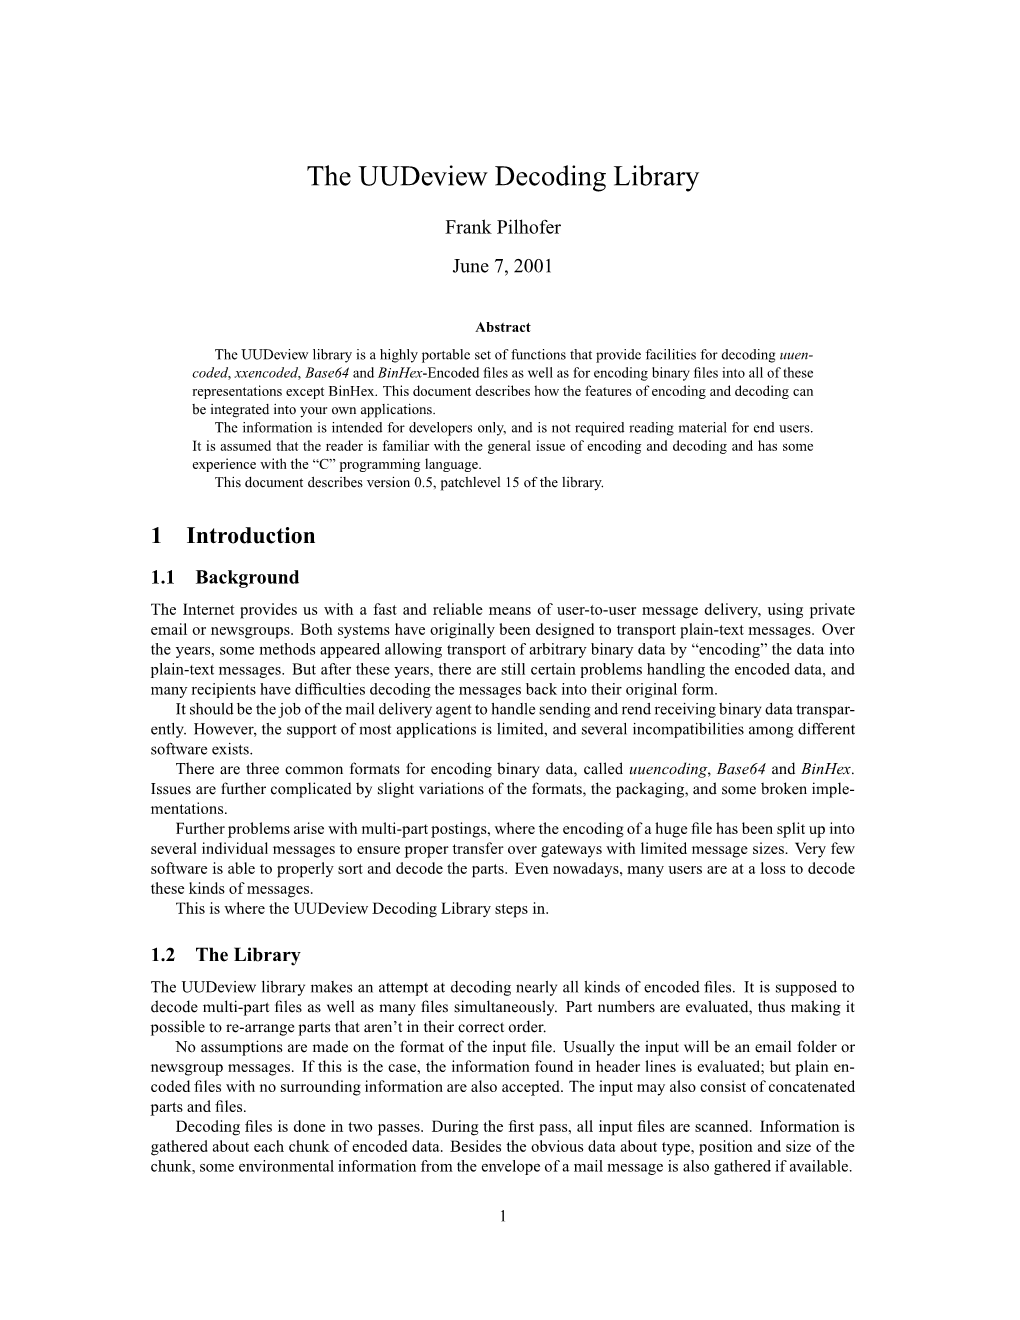 The Uudeview Decoding Library